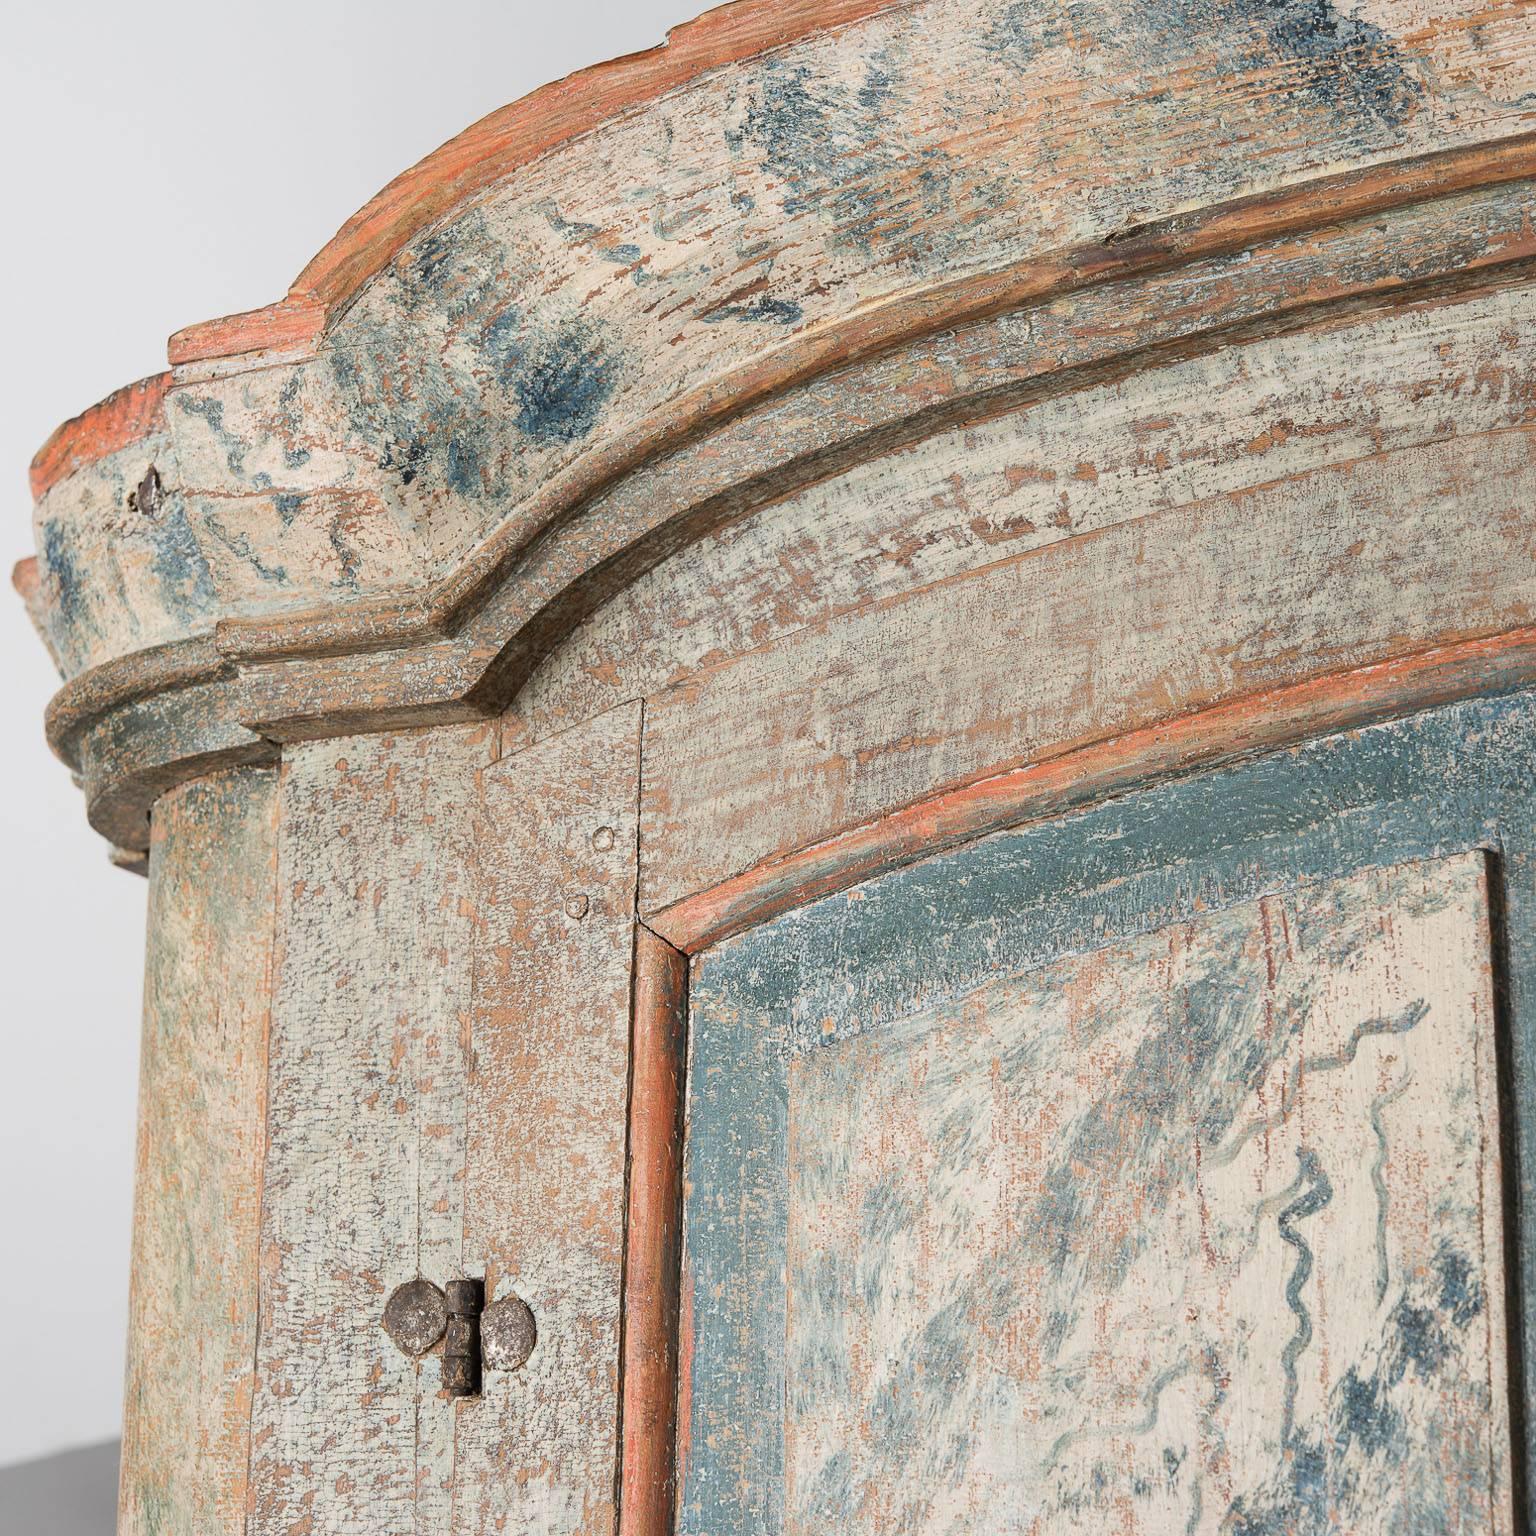 This cupboard, from an area northwest of Stockholm, was made by a master craftsman and artist. The combination of faux grain painting in blue and coral on the doors is fantastic and all original. This special piece has all the best elements of the